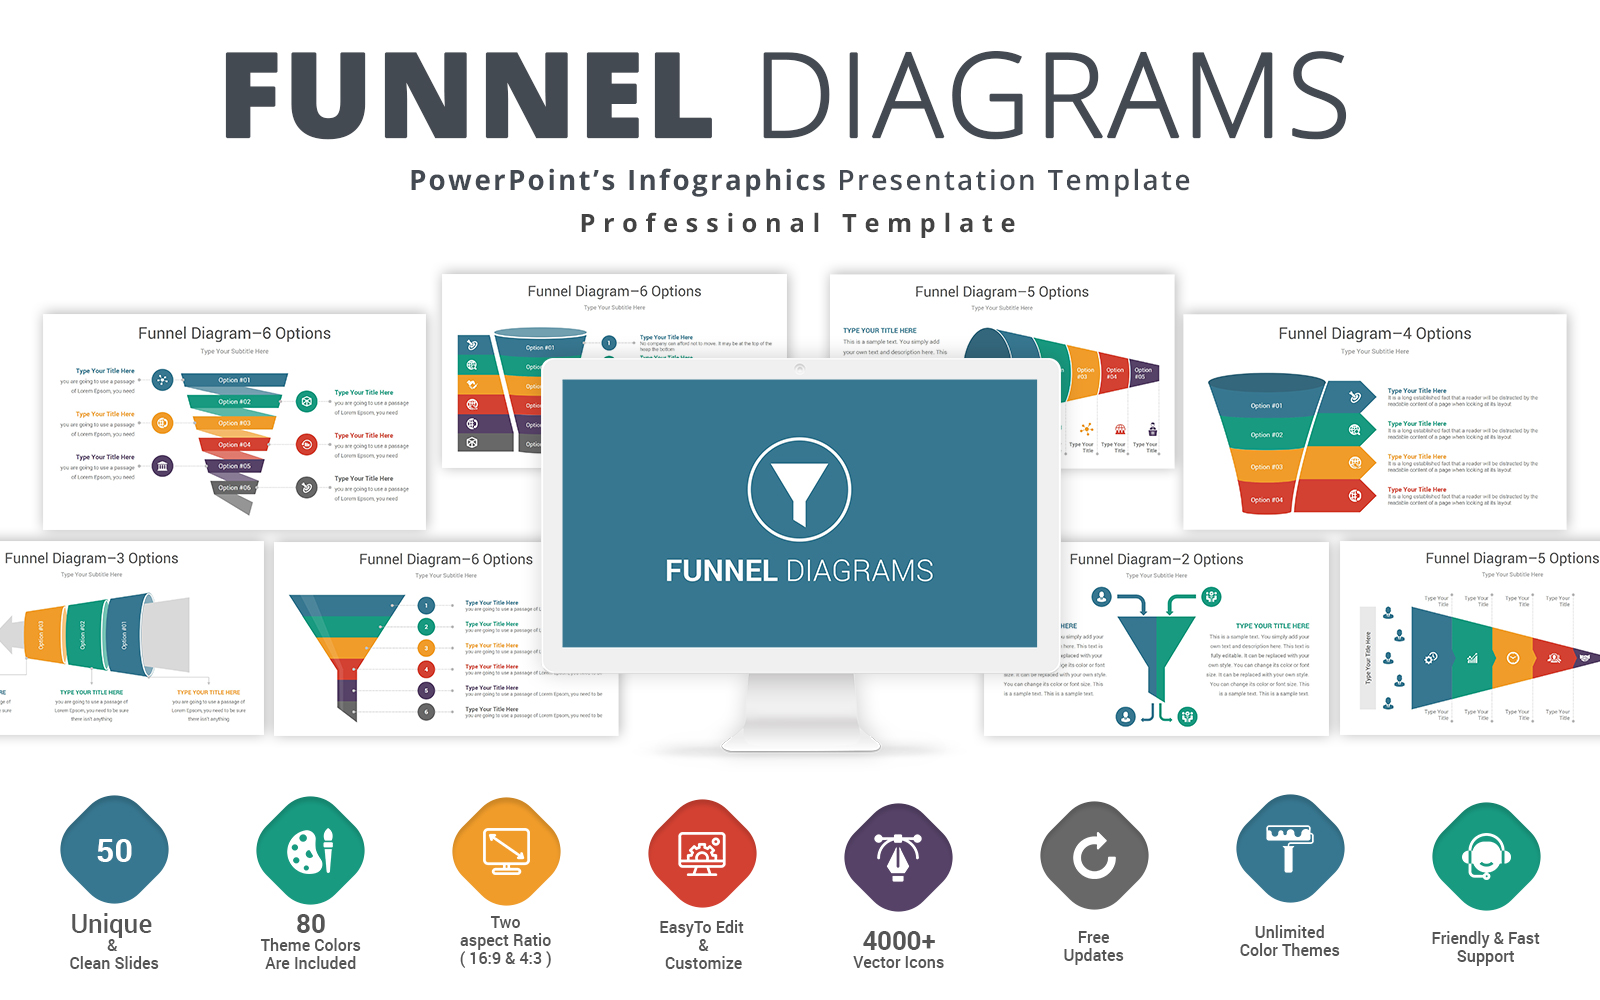 Funnel Diagrams PowerPoint template